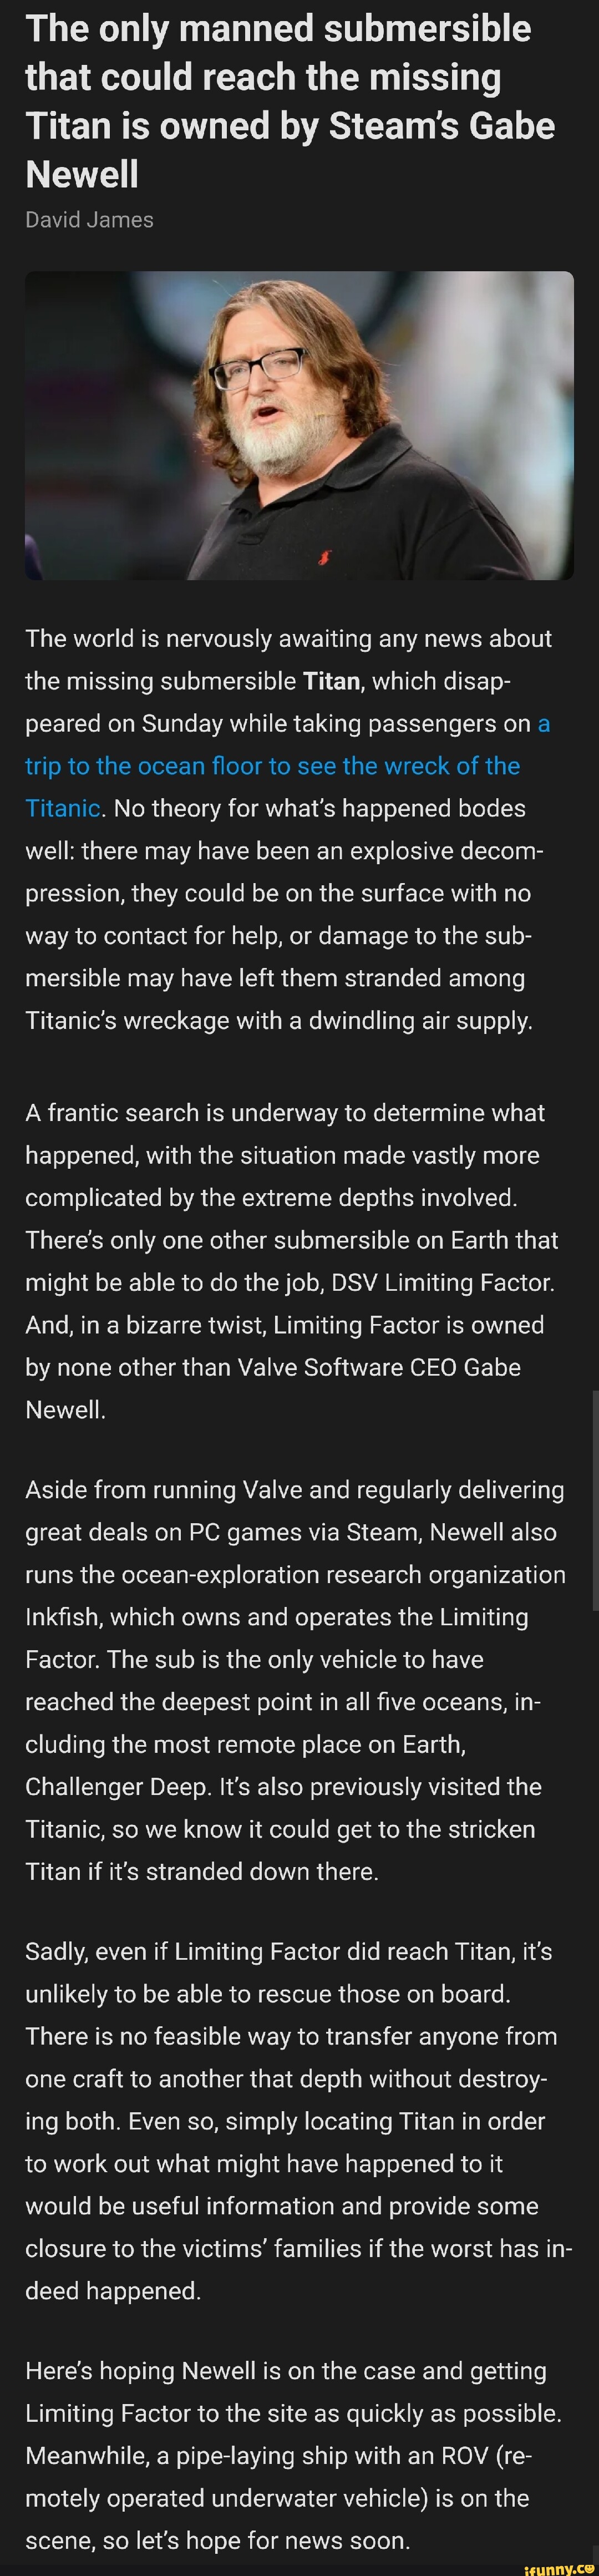 Meanwhile in steam, Gabe Newell